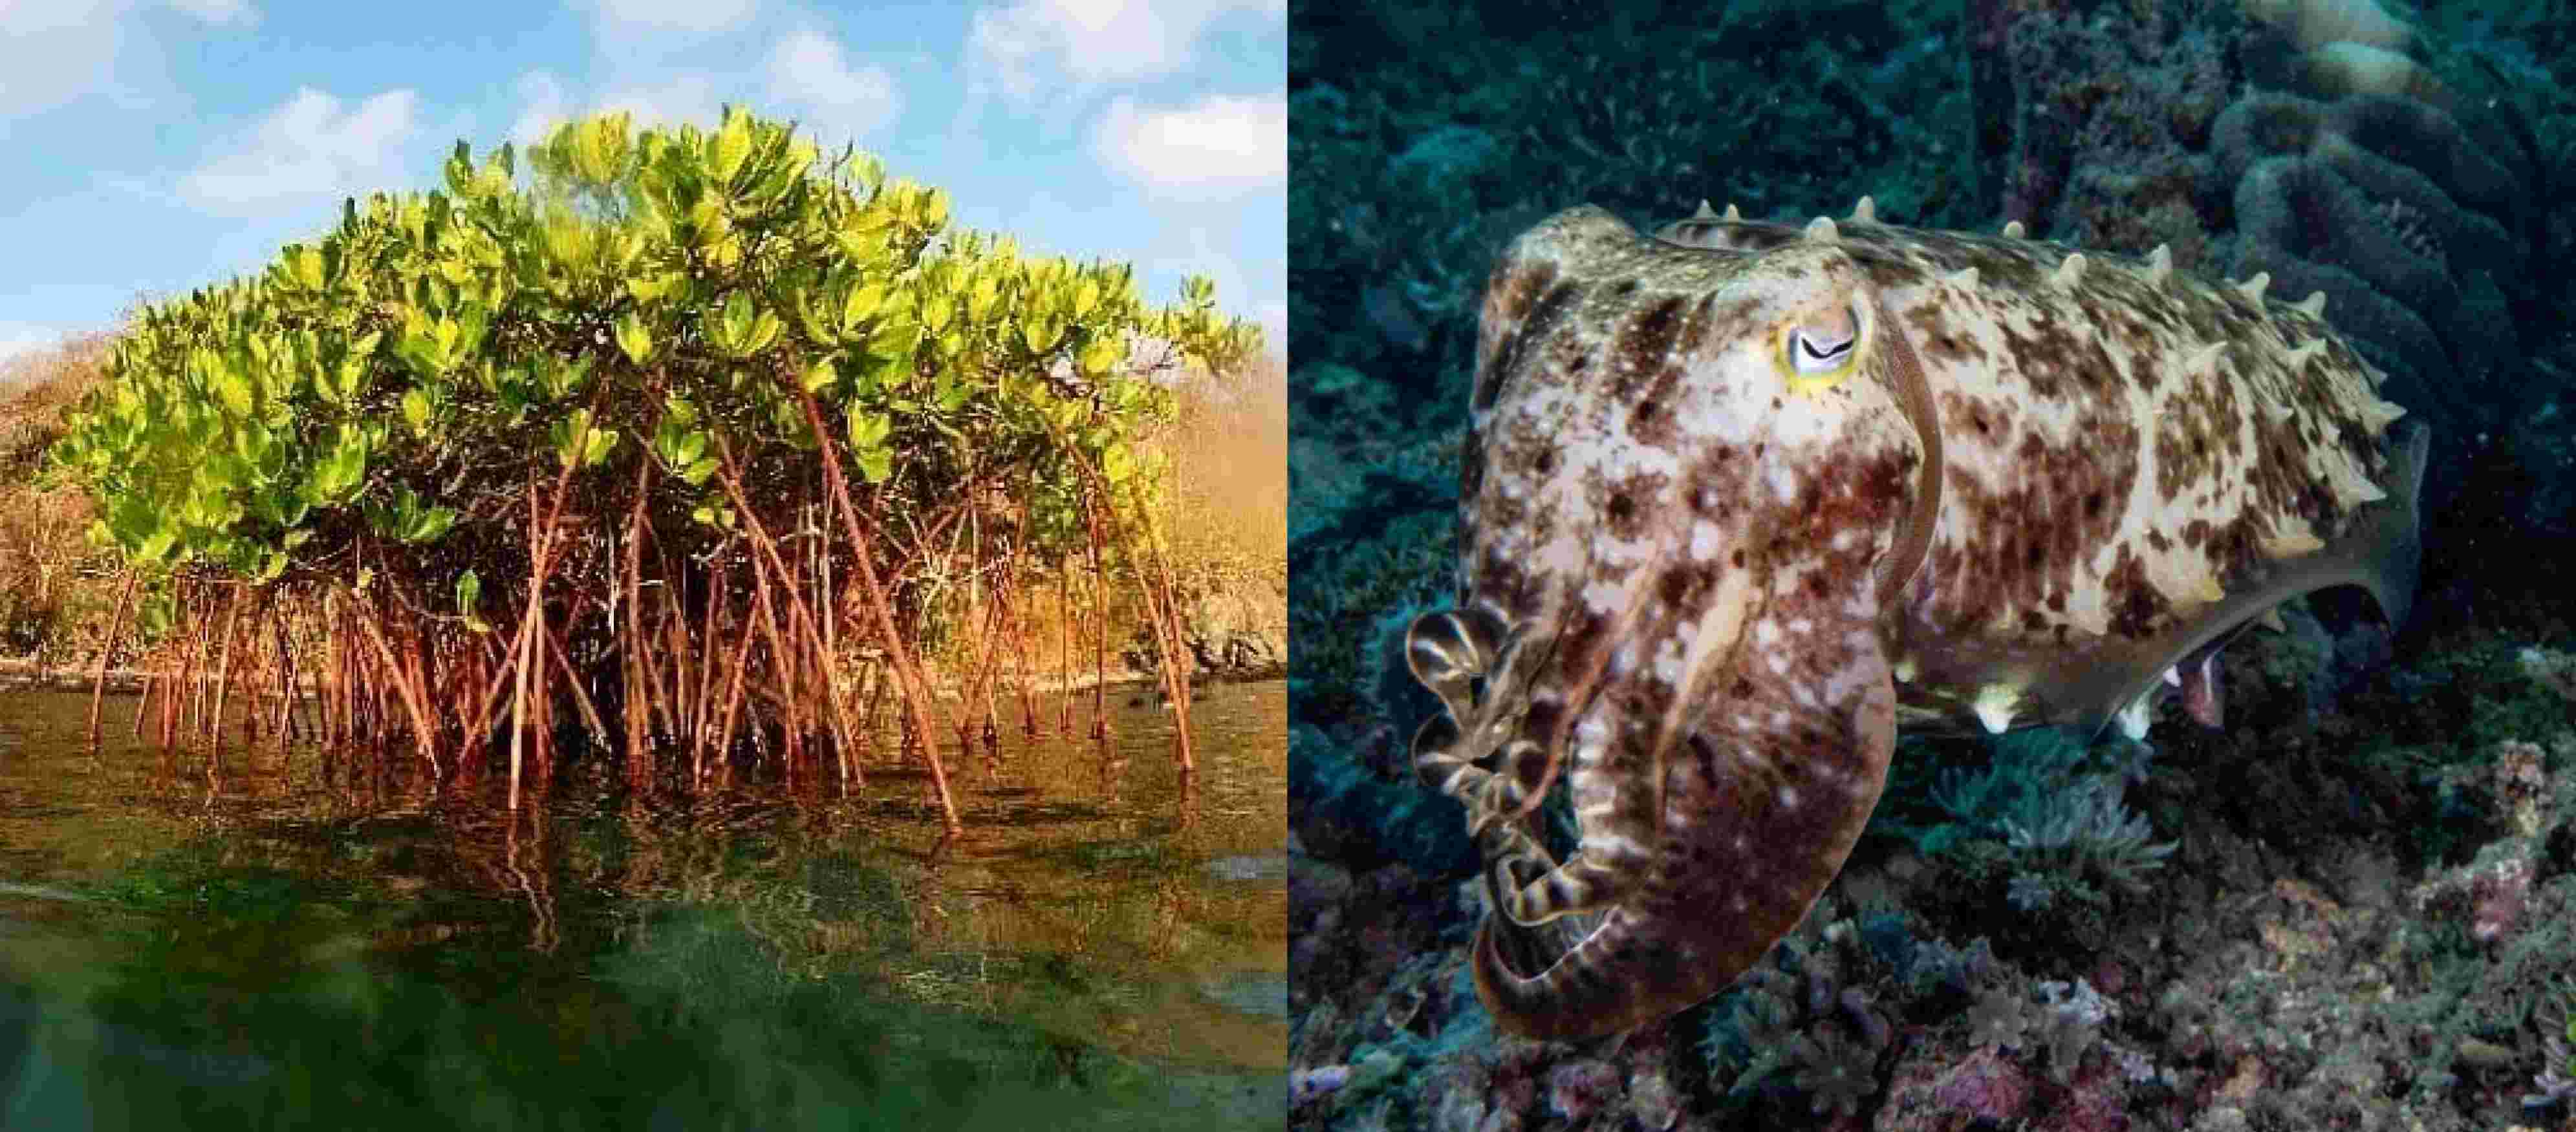 Treeapp’s fully grown mangroves and a cuttlefish in Lombok, Indonesia. 